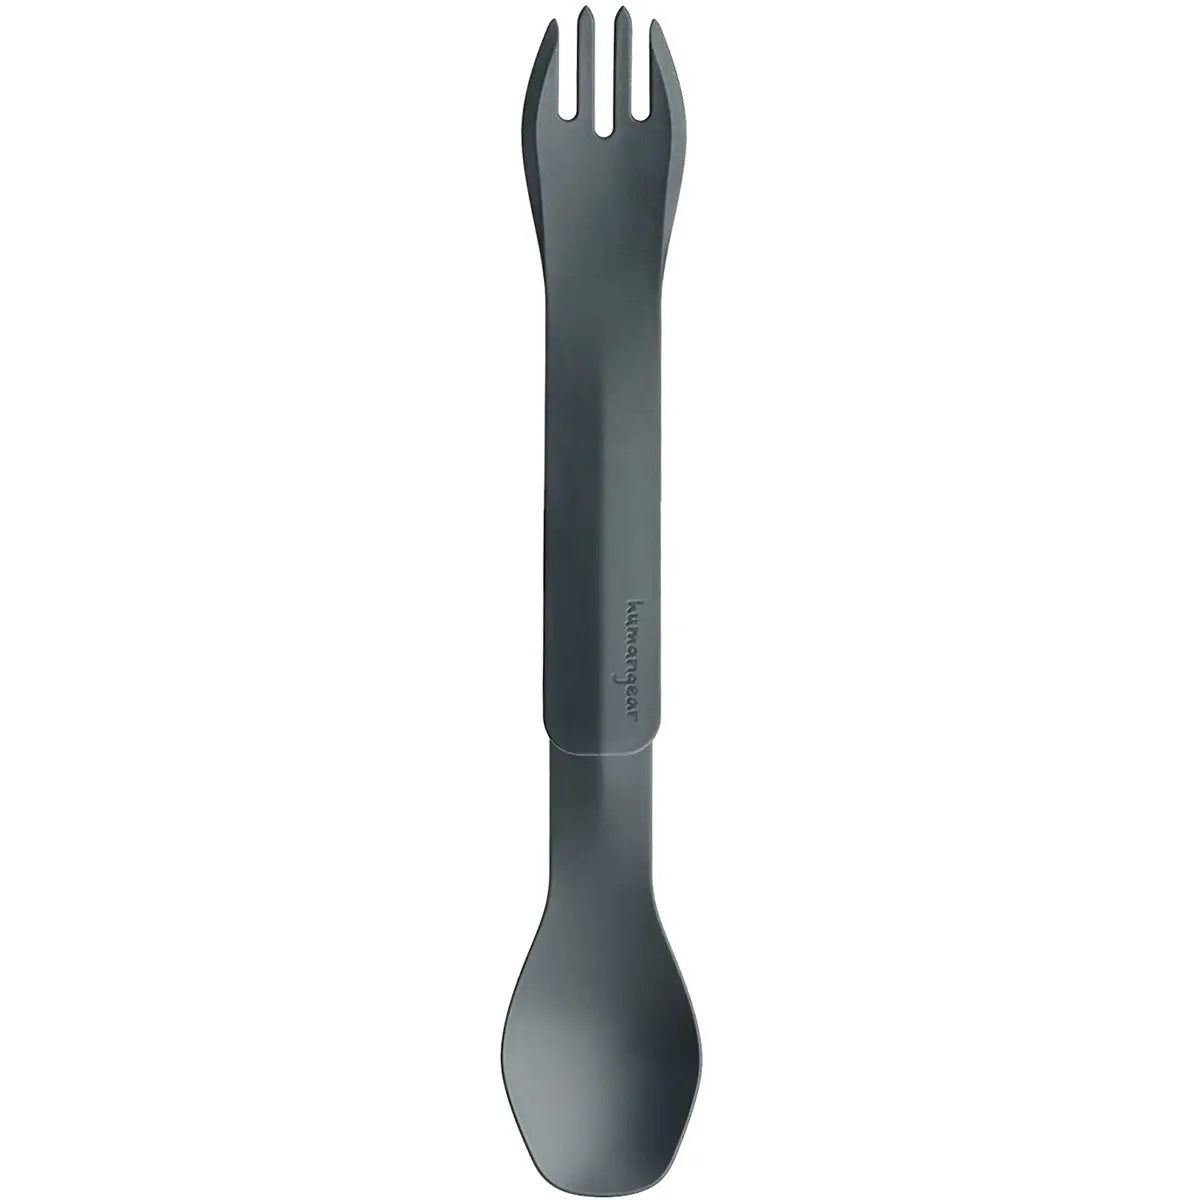 Humangear GoBites Duo Reusable Fork and Spoon Travel Utensils Humangear